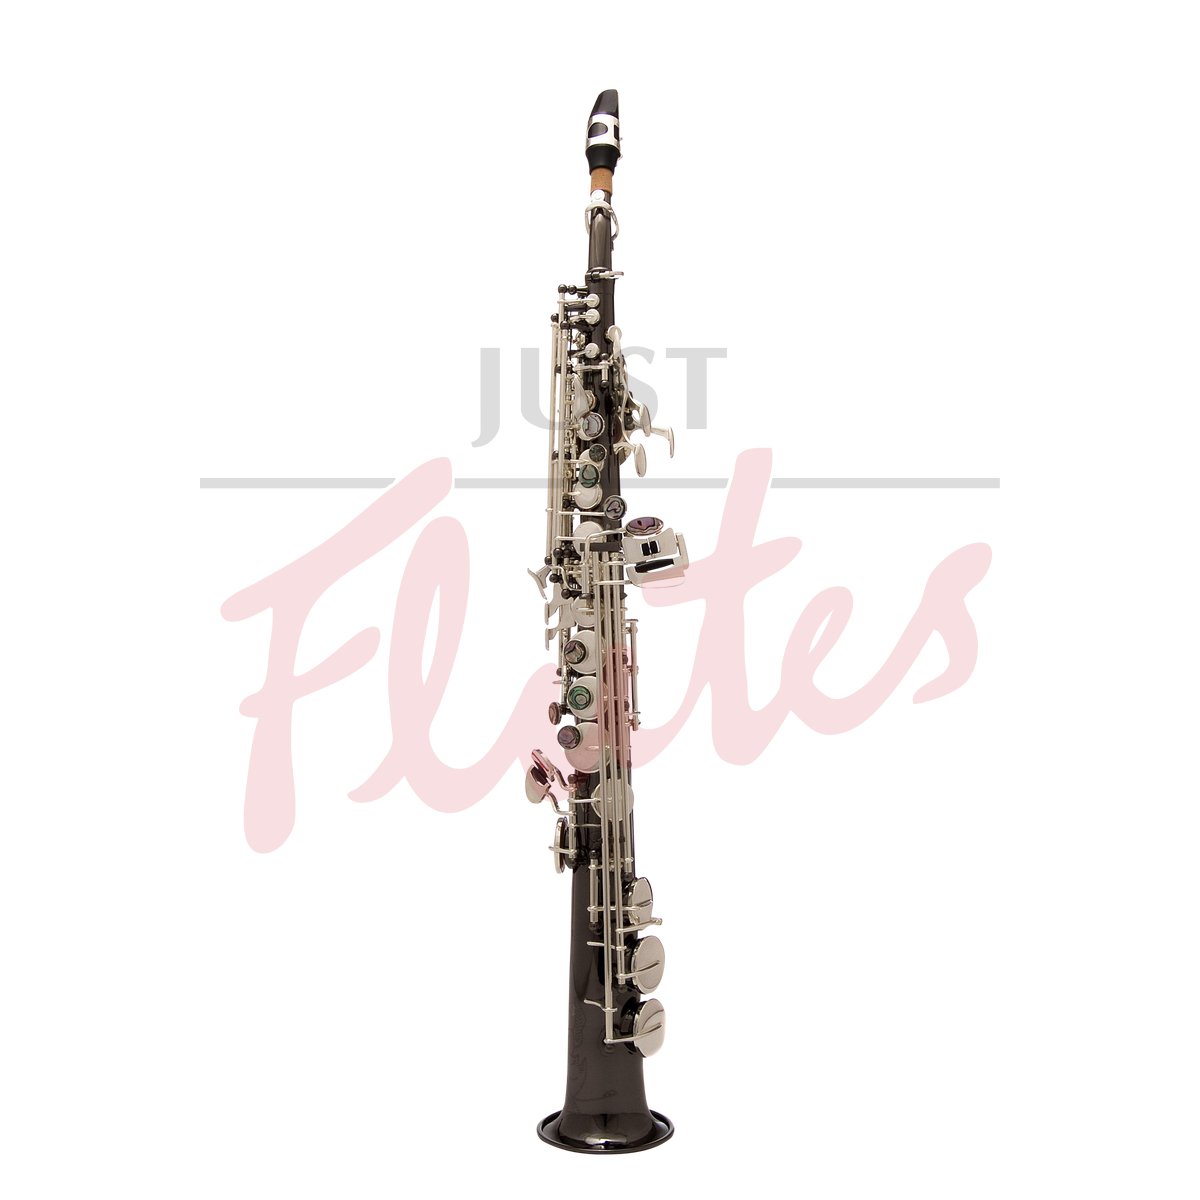 JP043BS Soprano Saxophone, Black lacquer with Silver-plated keys